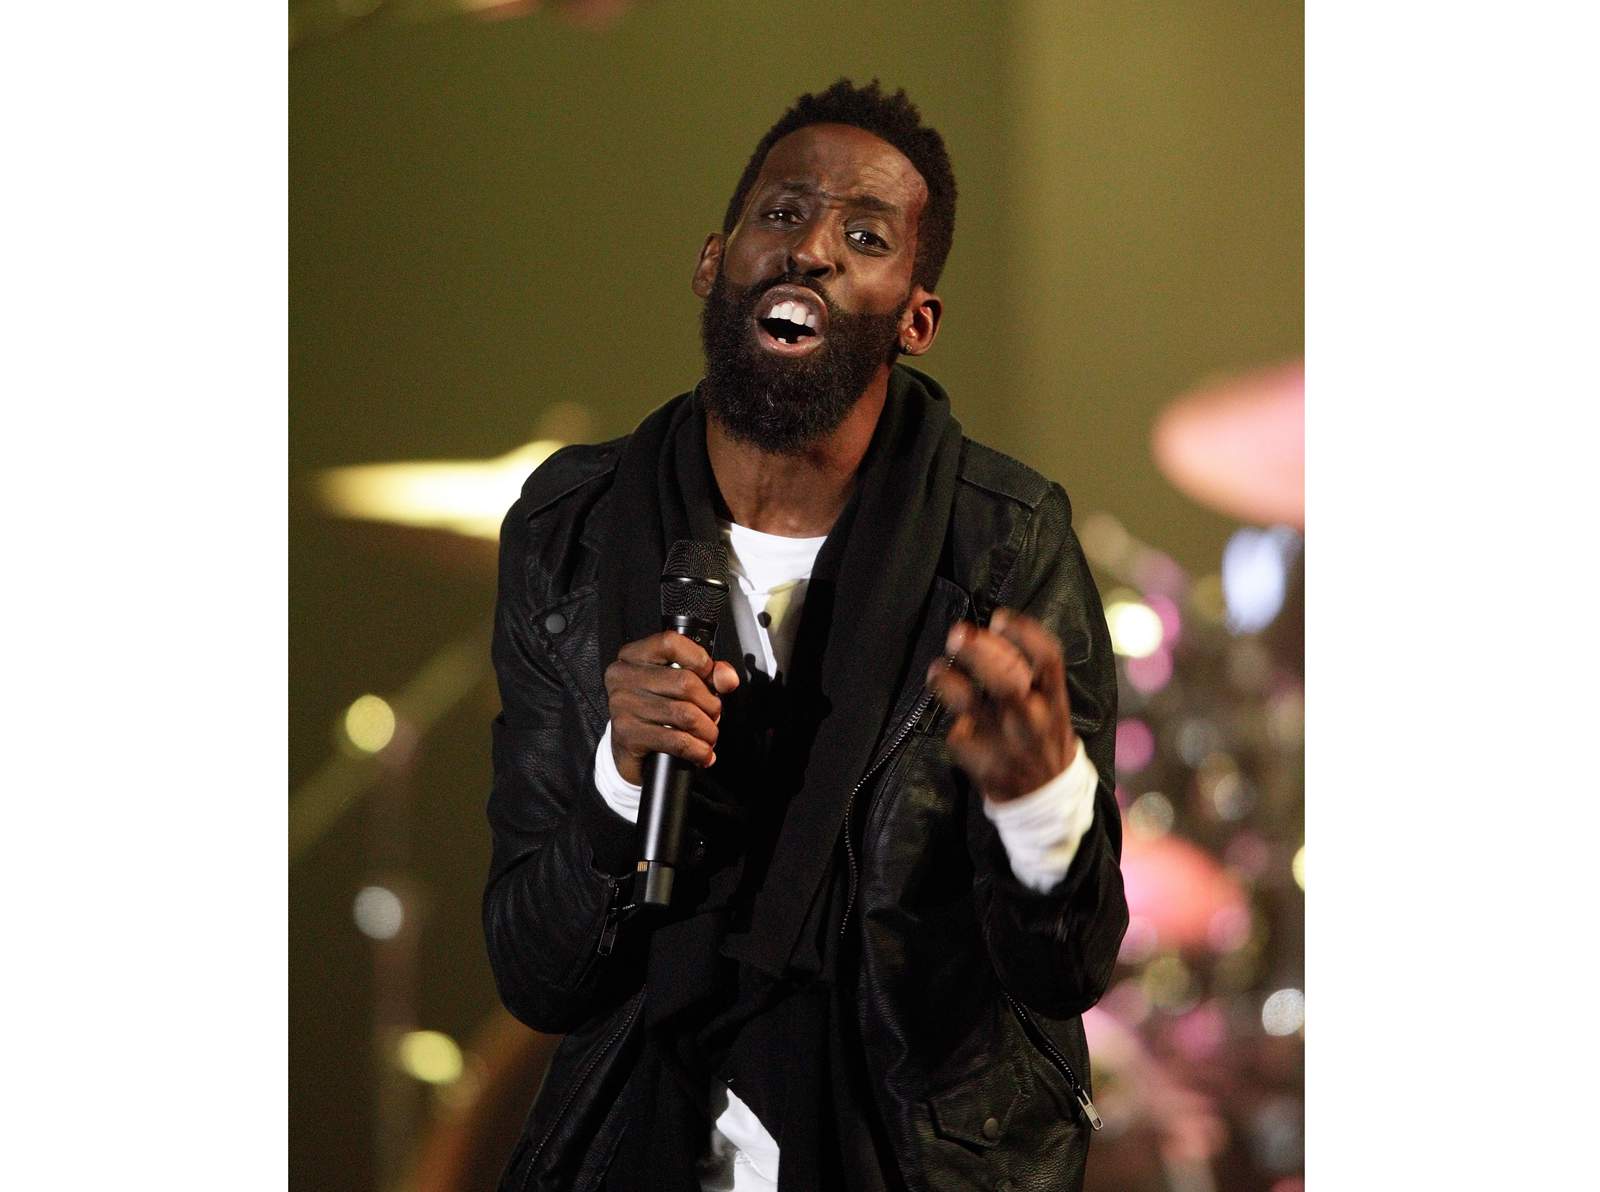 Tye Tribbett sends positive vibes with song amid virus